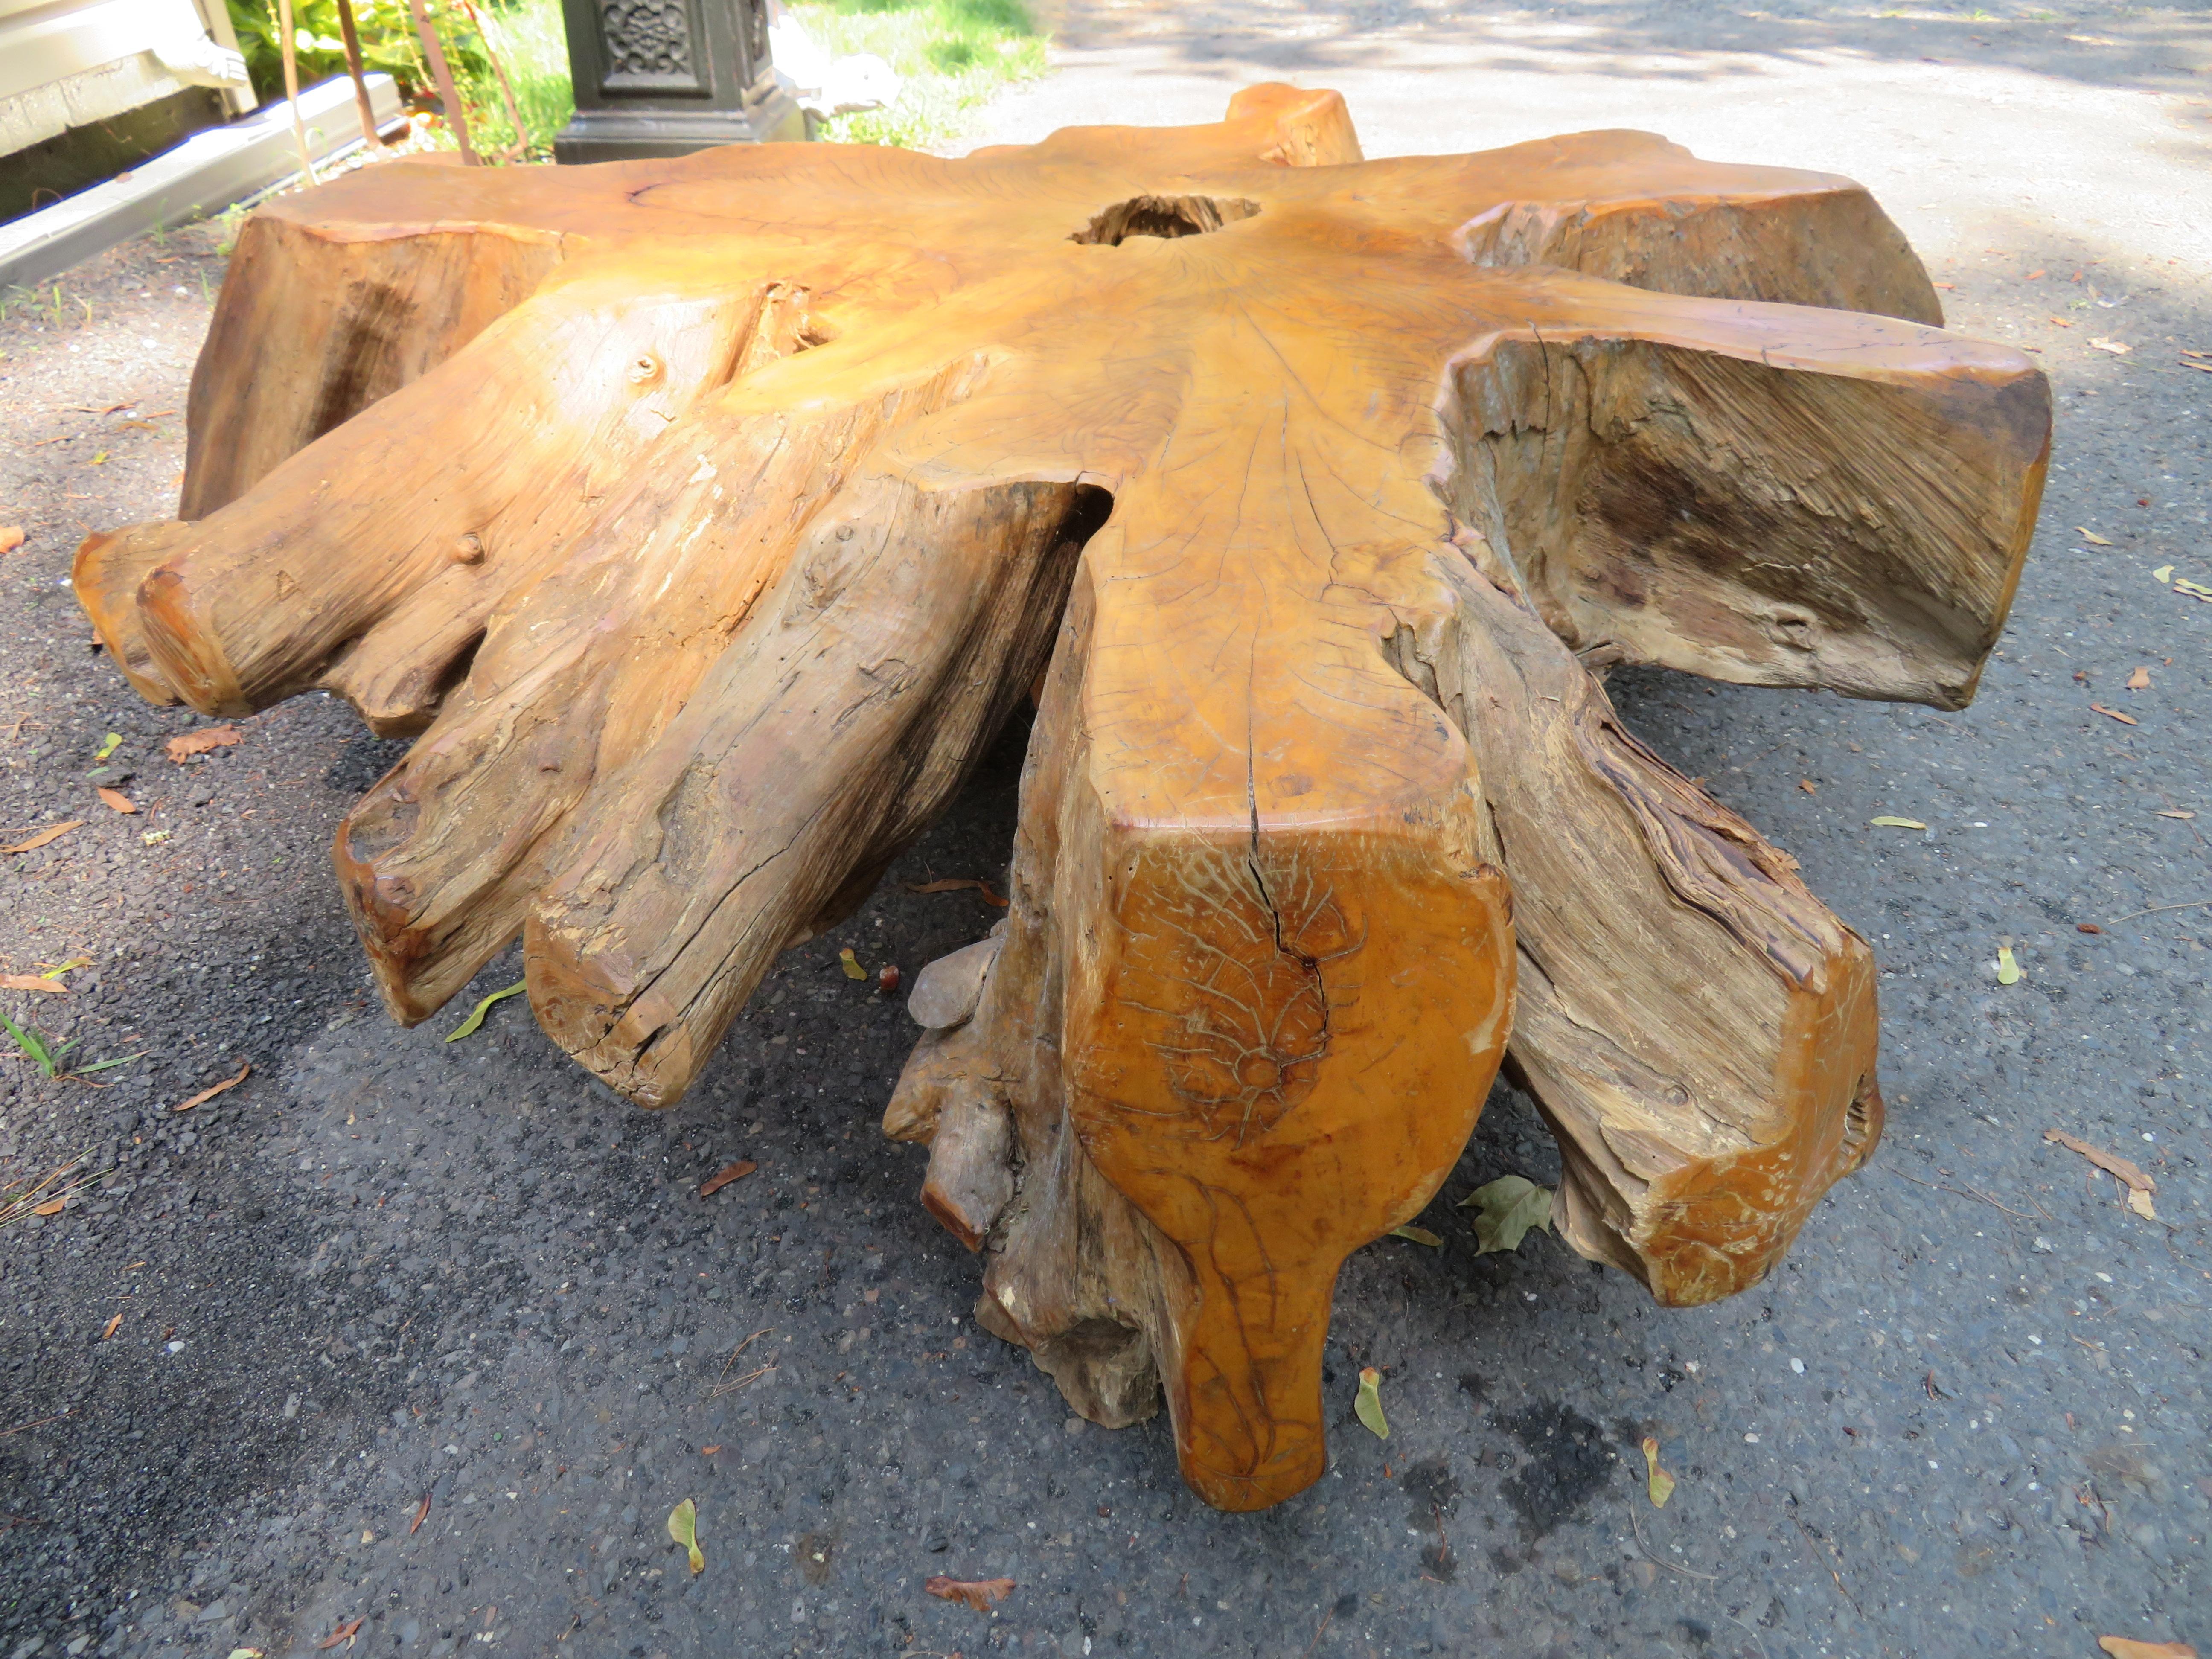 Magnificent Natural Raw Teak Hardwood Organic Root Coffee Table In Good Condition For Sale In Pemberton, NJ